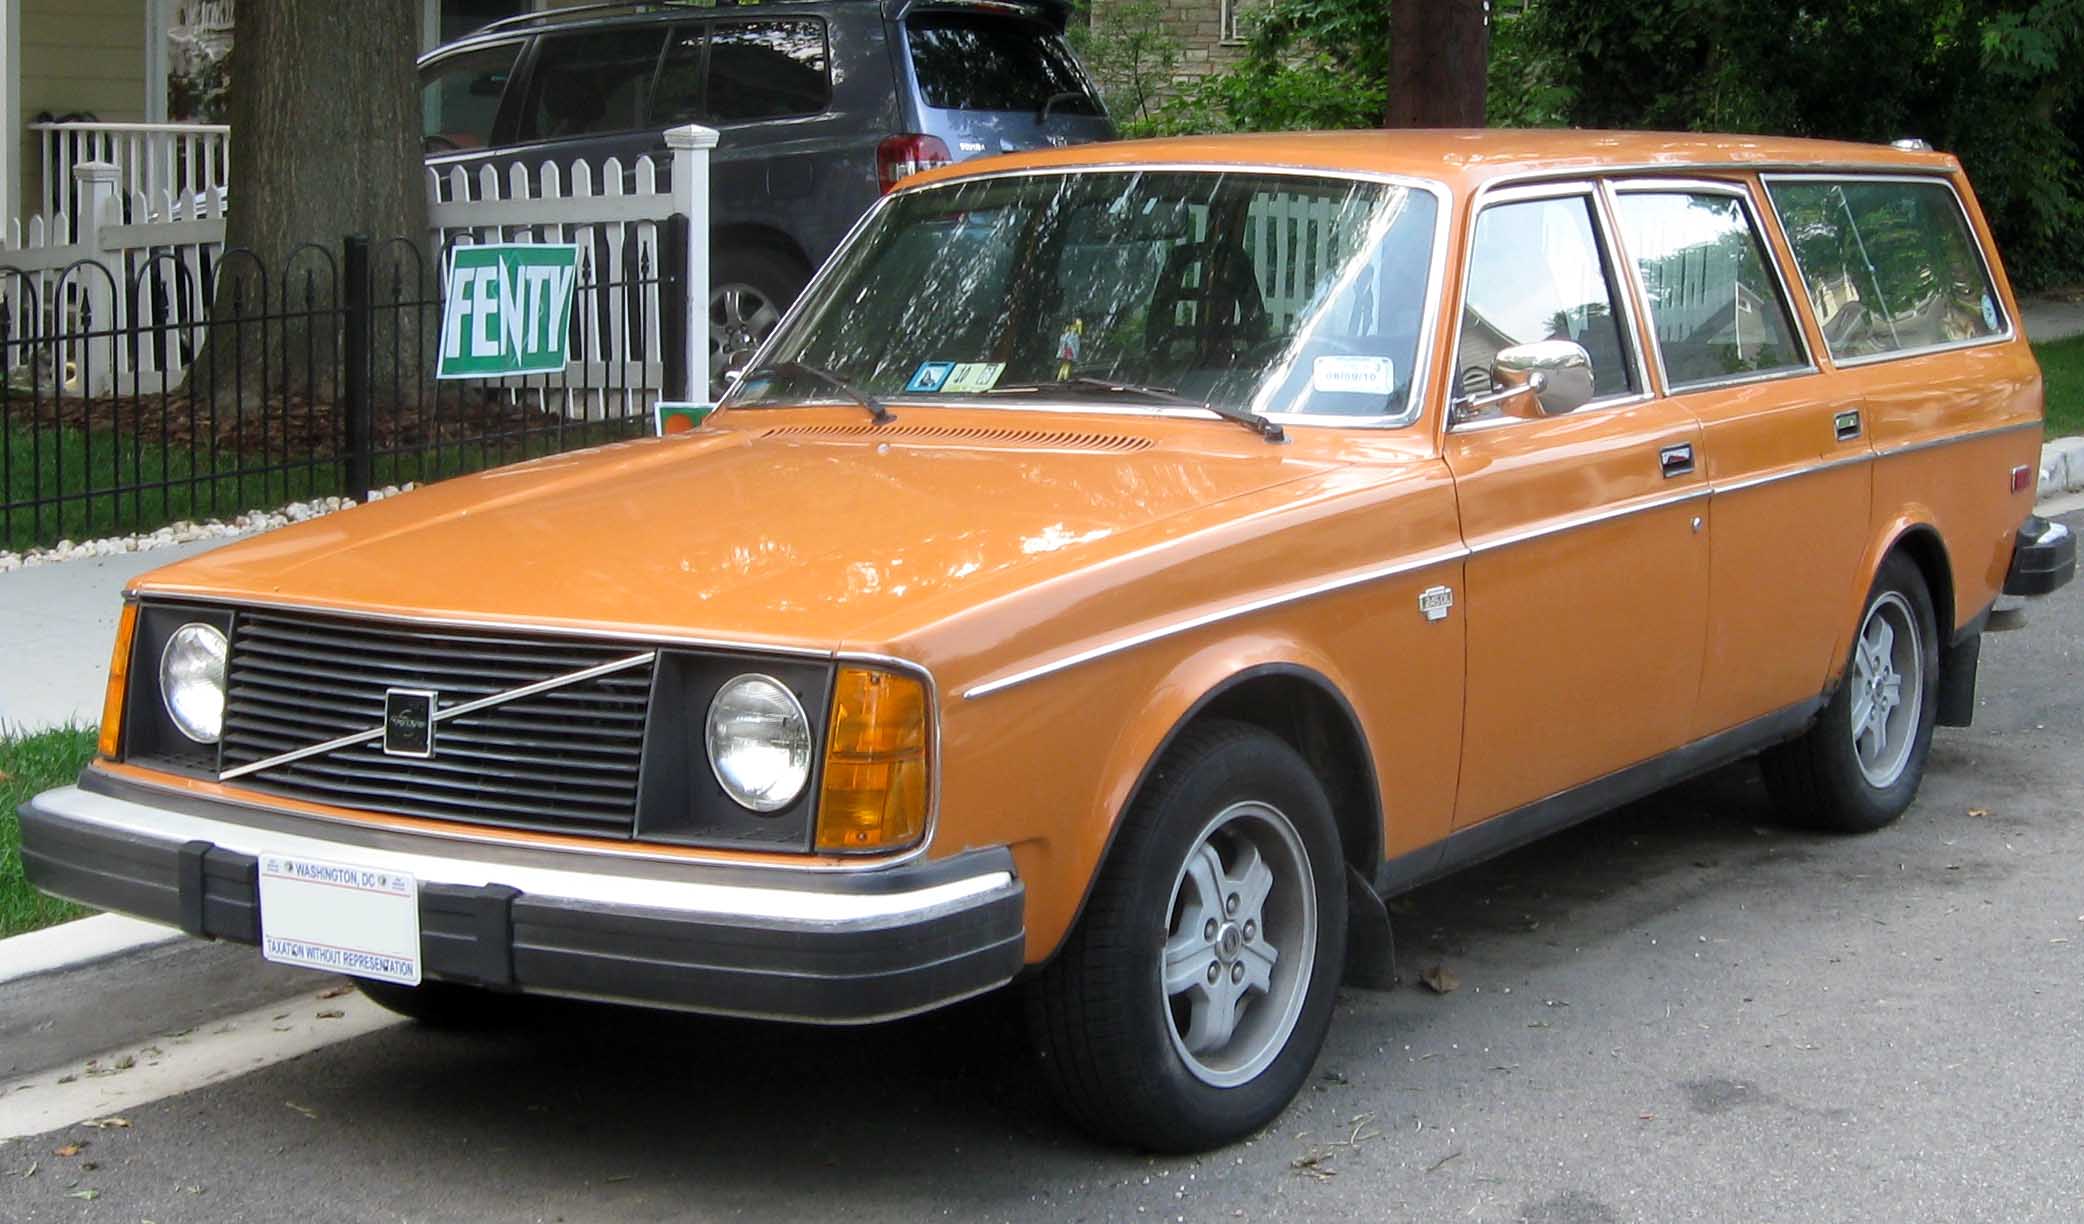 Volvo 245 dl wagon (104 comments) Views 17305 Rating 19